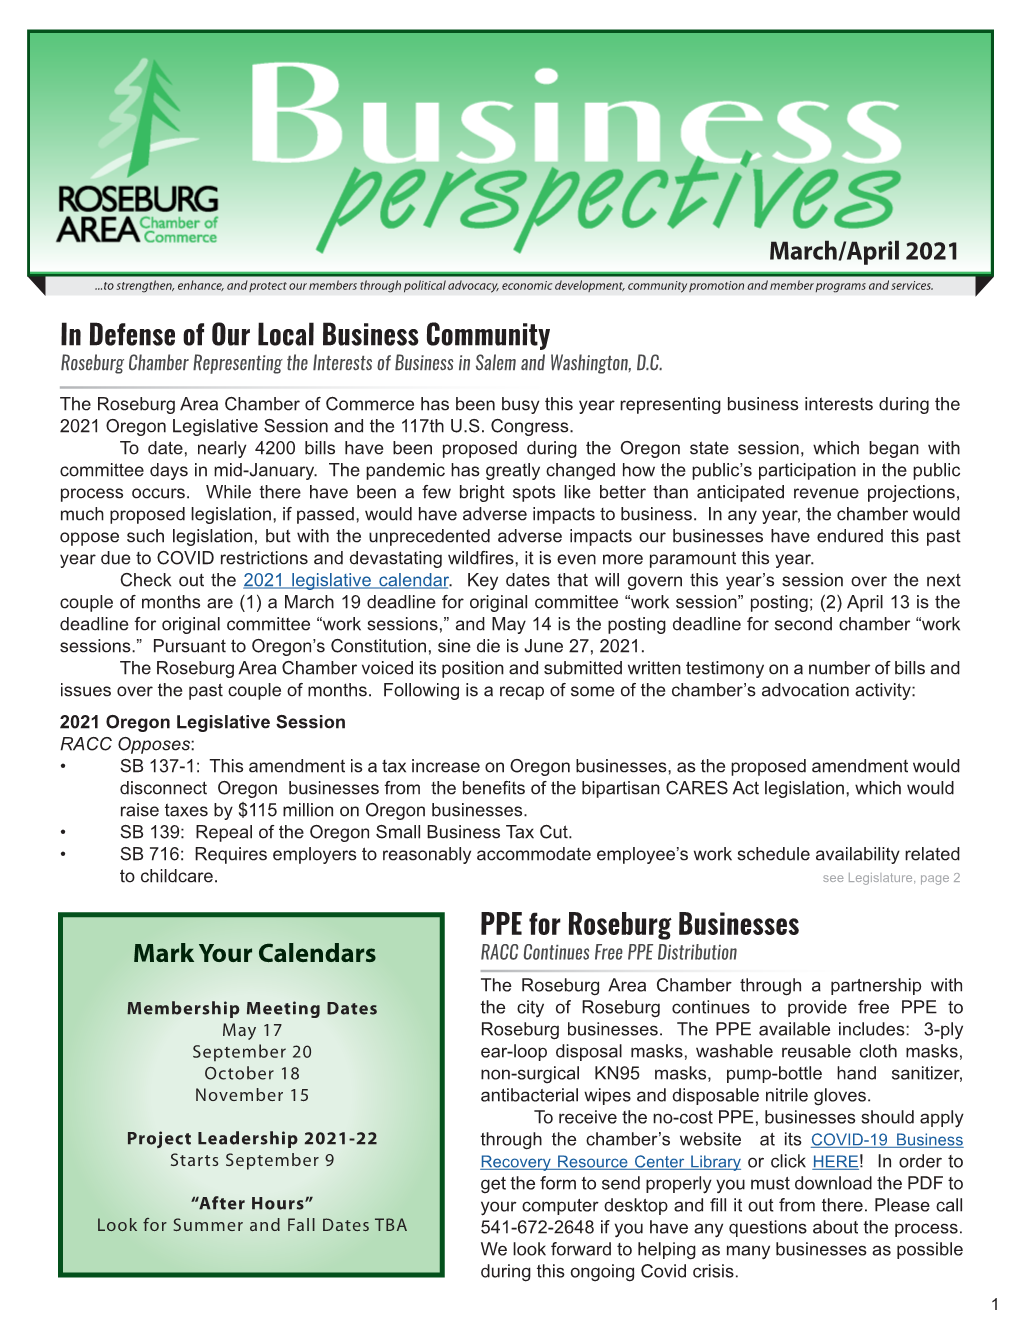 In Defense of Our Local Business Community Roseburg Chamber Representing the Interests of Business in Salem and Washington, D.C